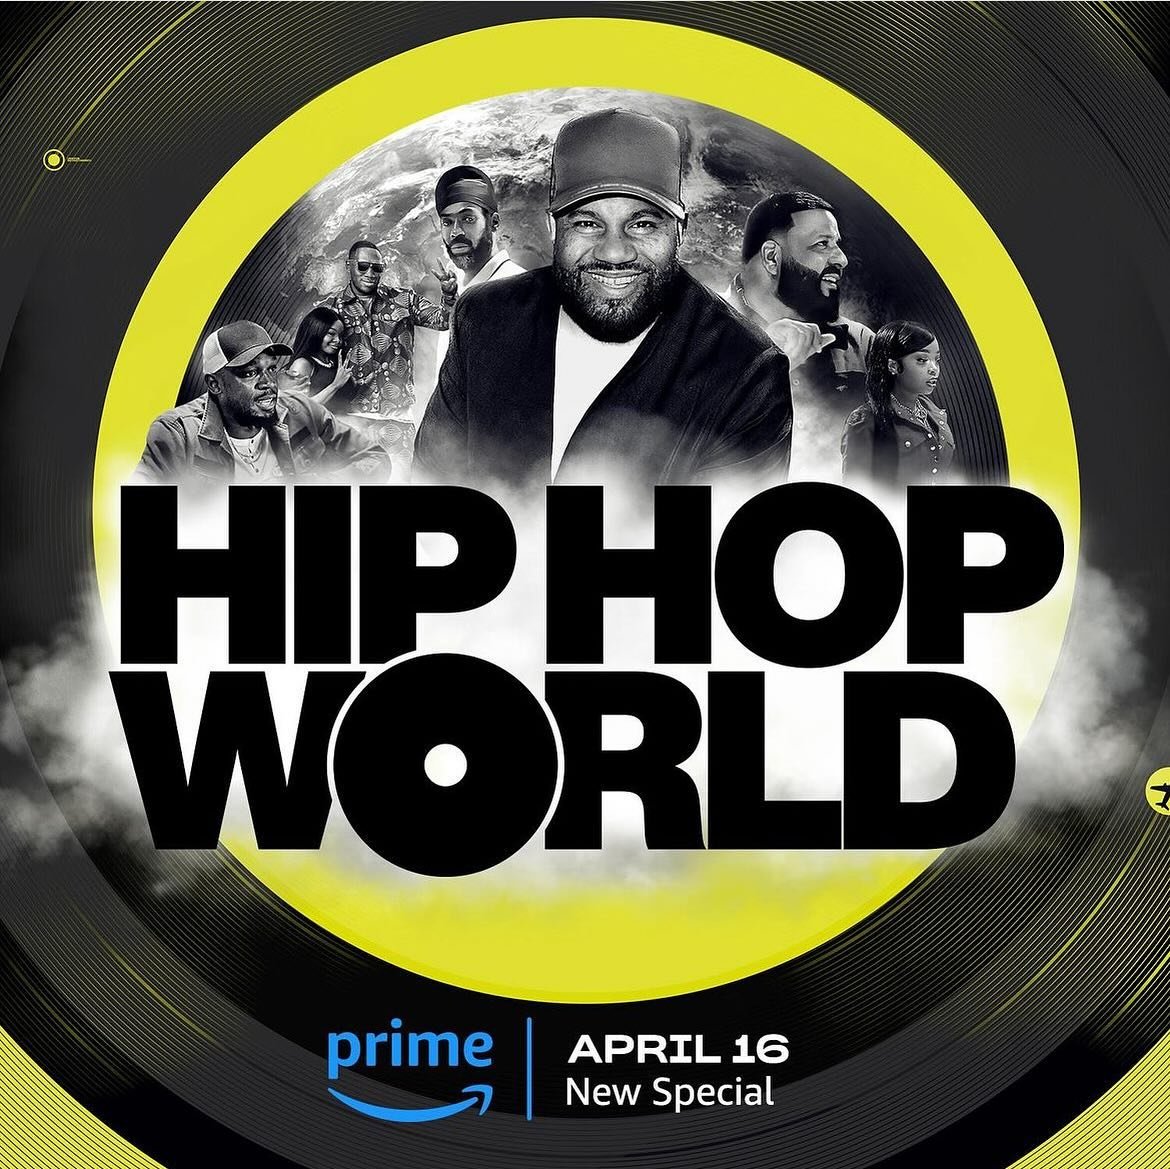 @MotionPictureEnterprises is excited to announce the premiere of @StickFigureProductions new show, Hip Hop World. Check it out on @AmazonPrime and @AmazonFreevee!
Starring Lenny S @kodaklens and guests, @DJKhaled, @Lola.Brooke, @BujuBanton, Mokob&eac